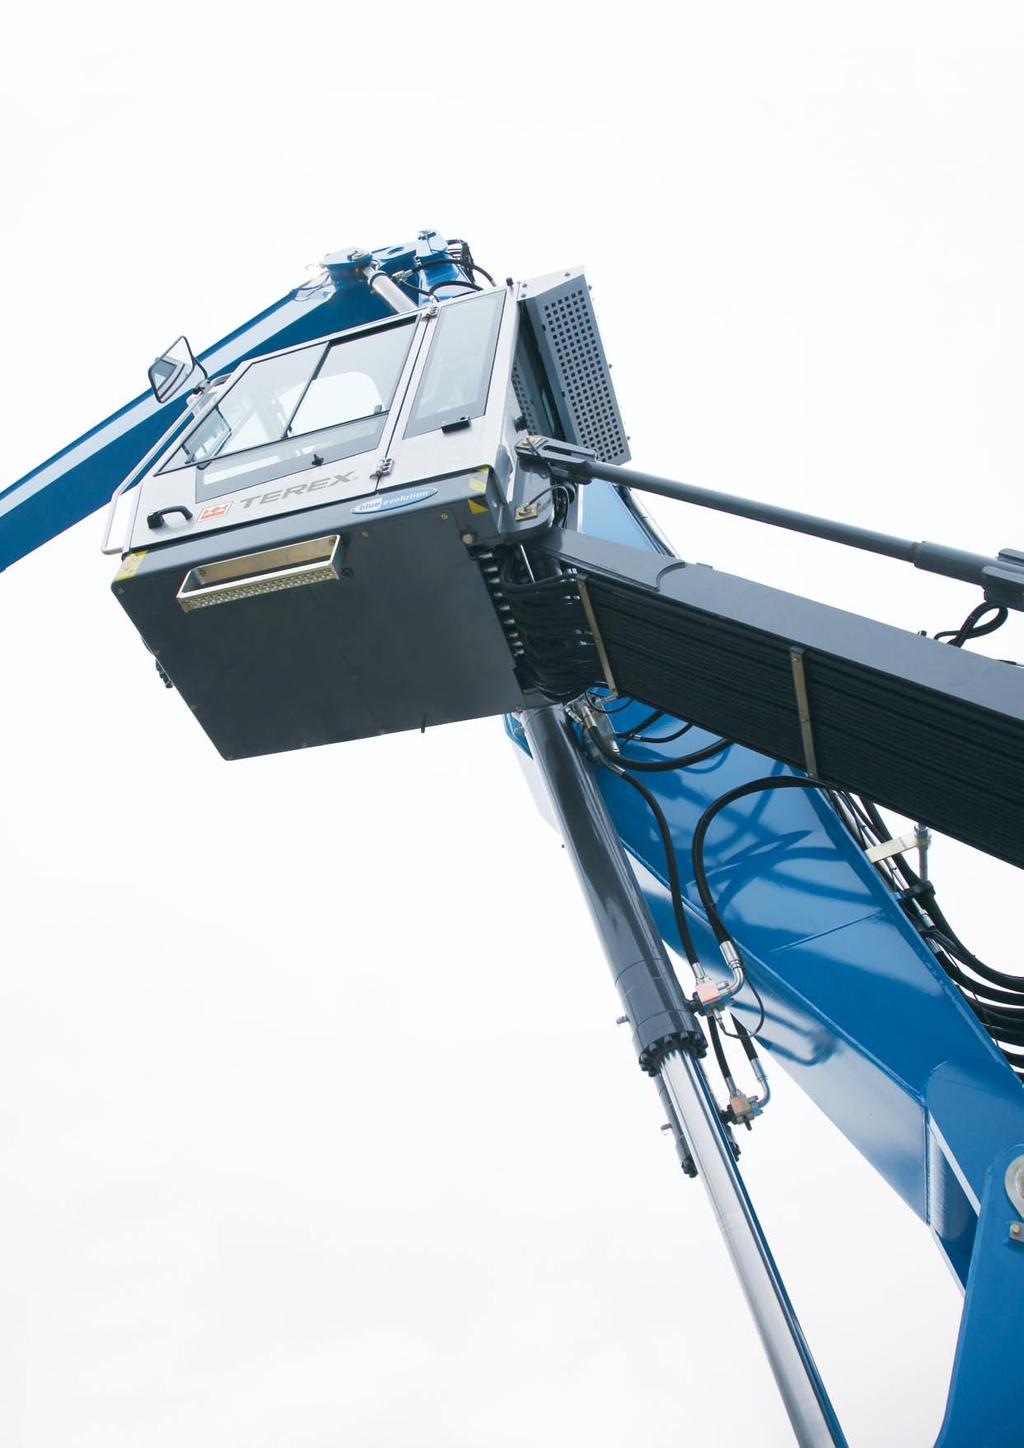 FASTER AND MORE PRECISE THAN BEFORE The machine s sophisticated hydraulic system is yet another Terex Fuchs highlight The new hydraulic system design of the MHL360 E provides even greater power and